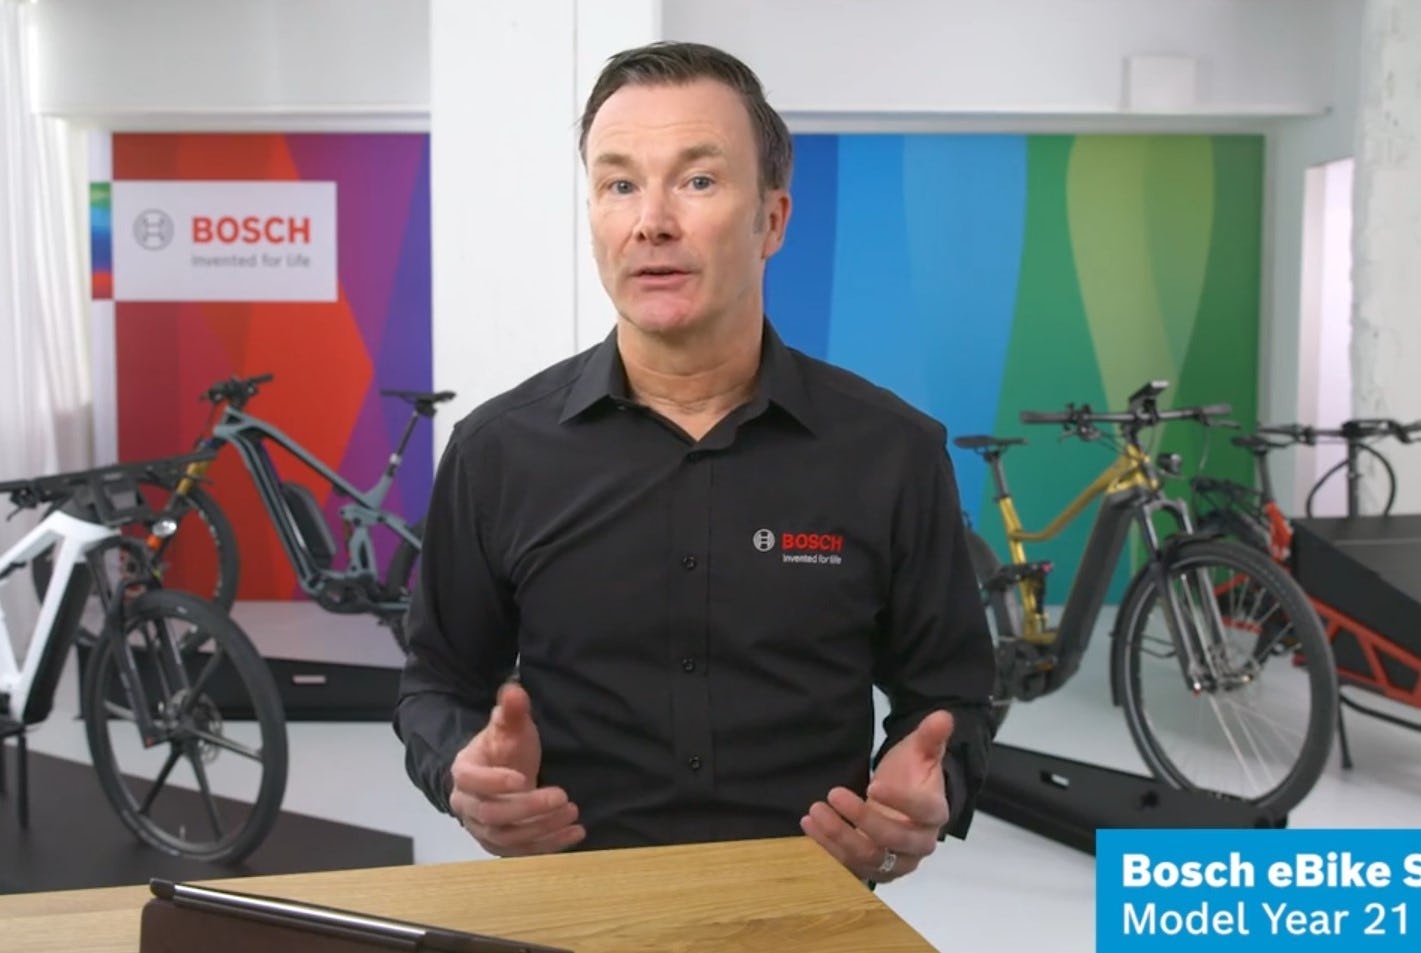 “We see that a growing number of people opt for an e-bike or bicycle for their transport,” said Bosch eBike Systems CEO Claus Fleischer. – Photo Bike Europe 